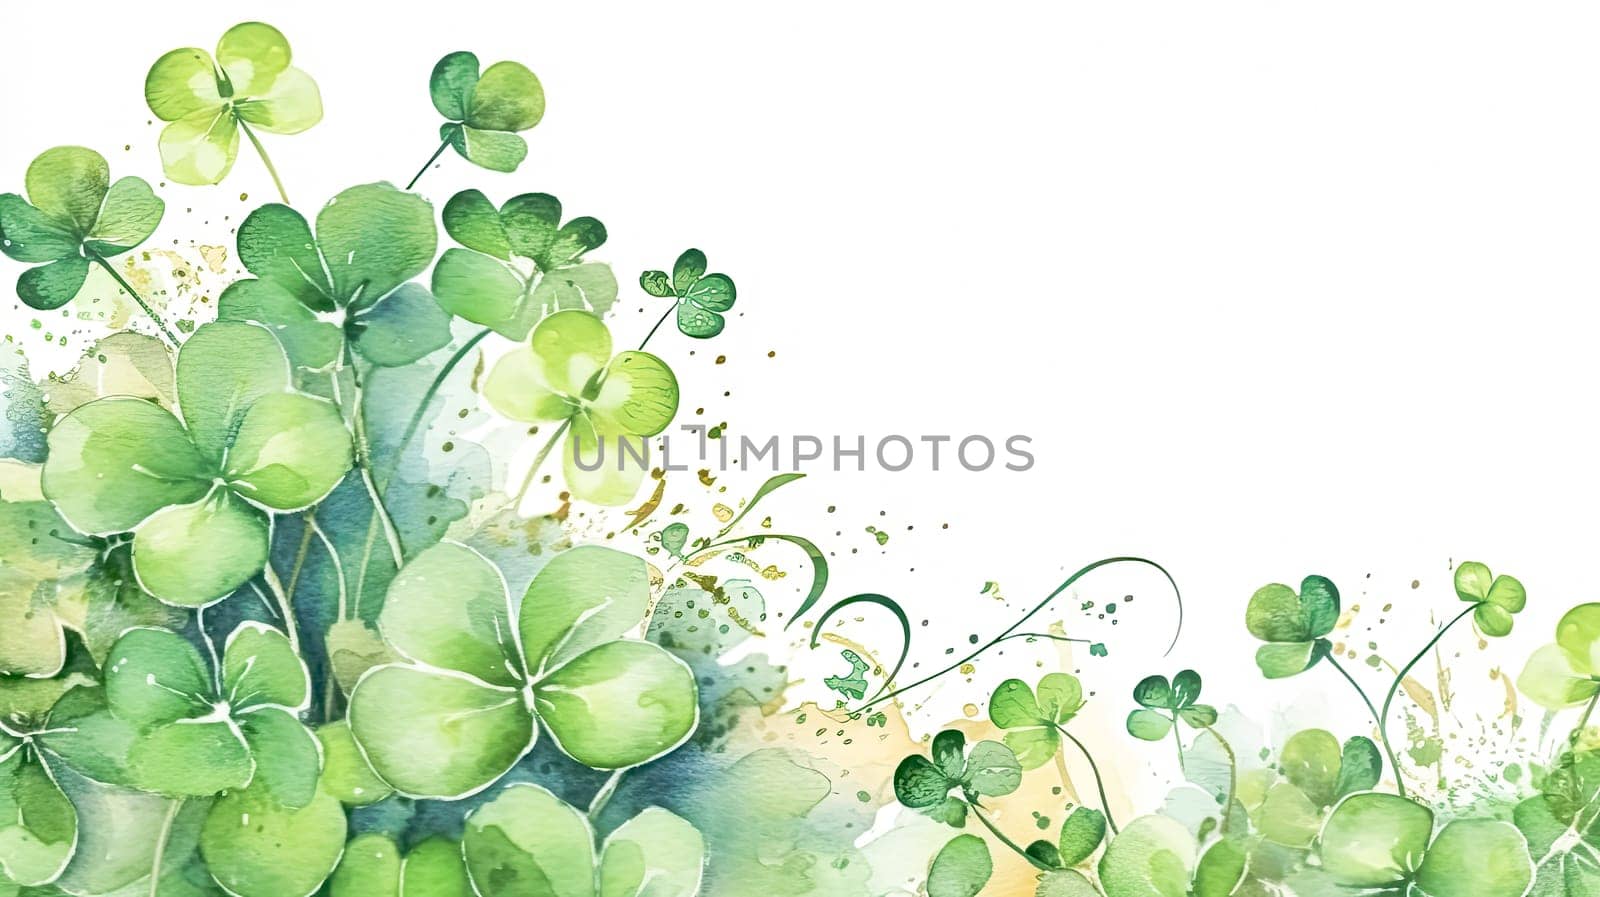 In the spirit of St. Patricks Day, a watercolor image showcases the delicate beauty of the clover, a cherished emblem of good luck and Irish tradition